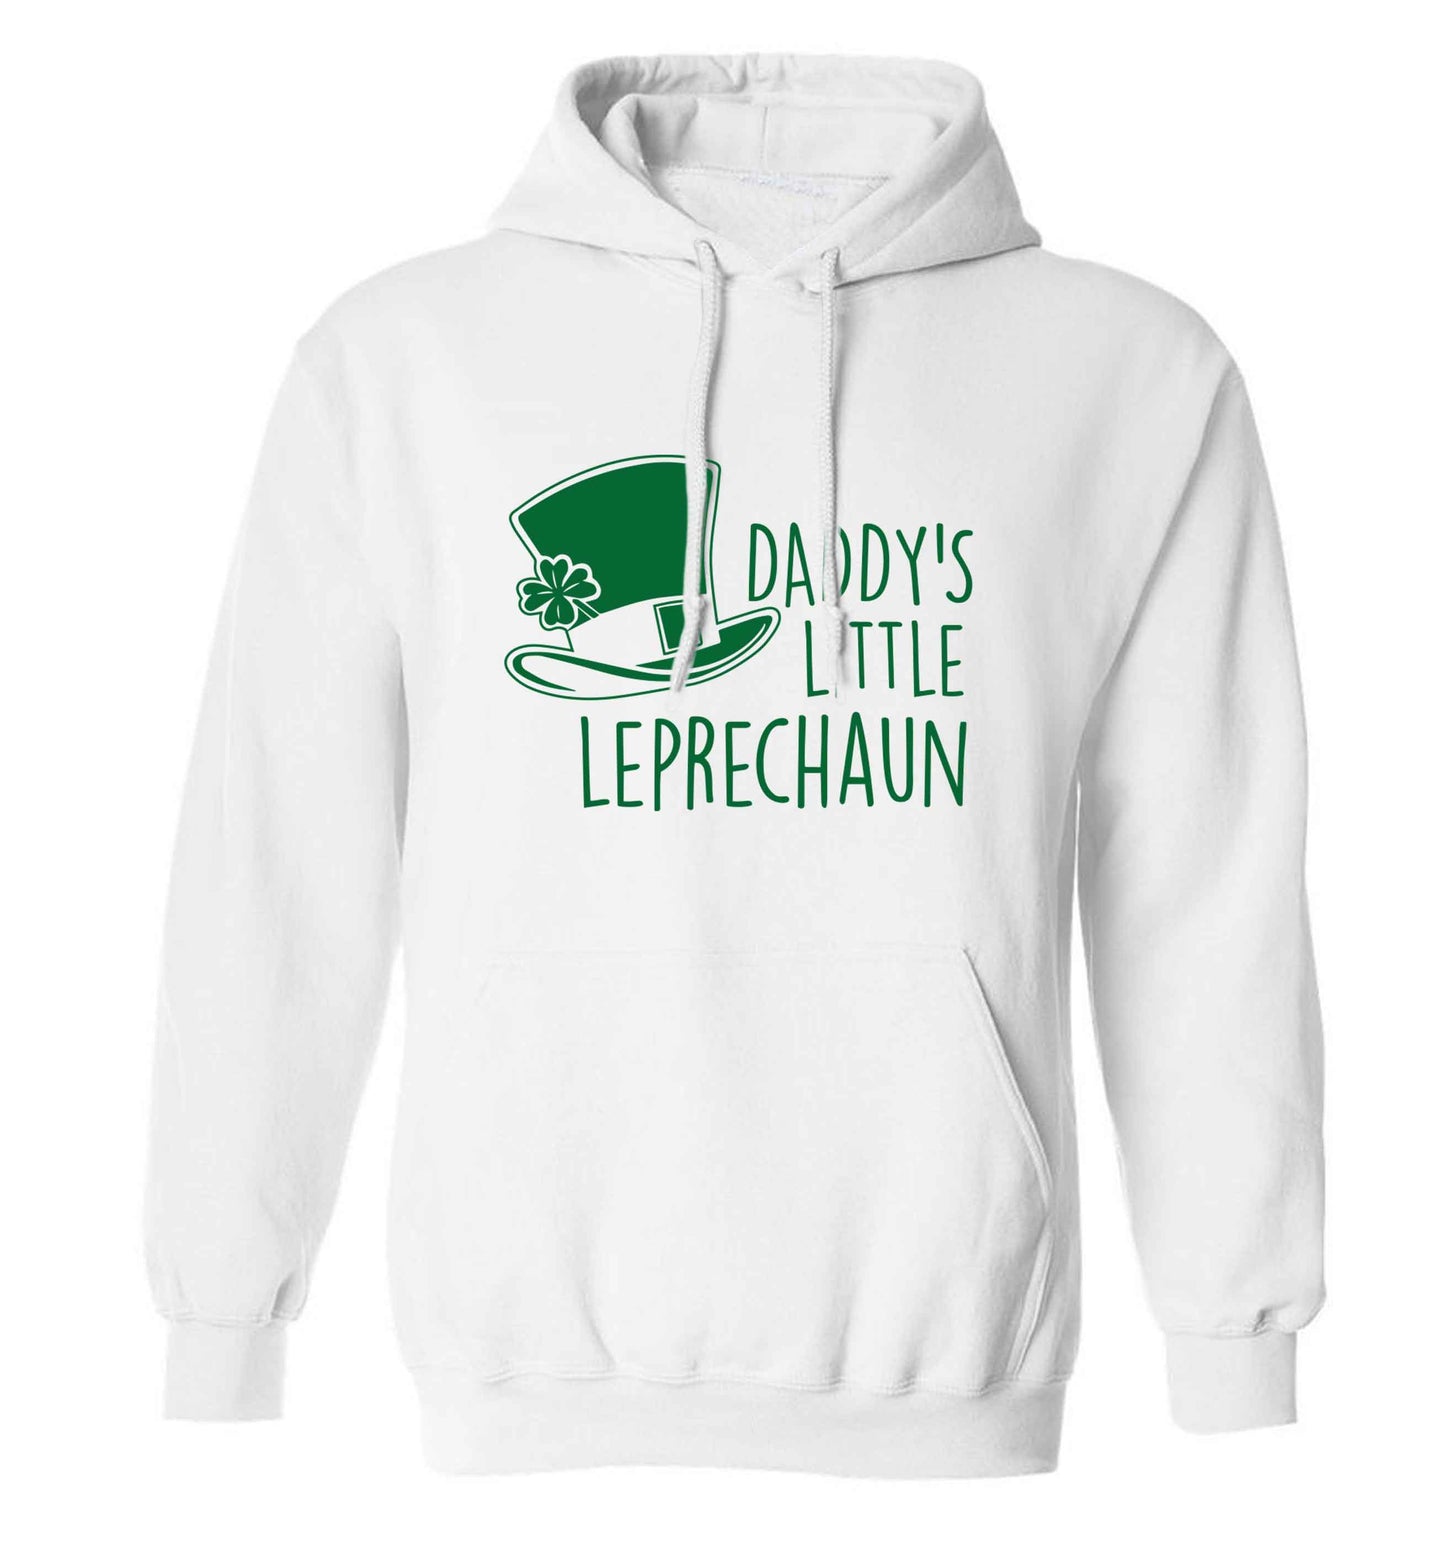 Daddy's lucky charm adults unisex white hoodie 2XL